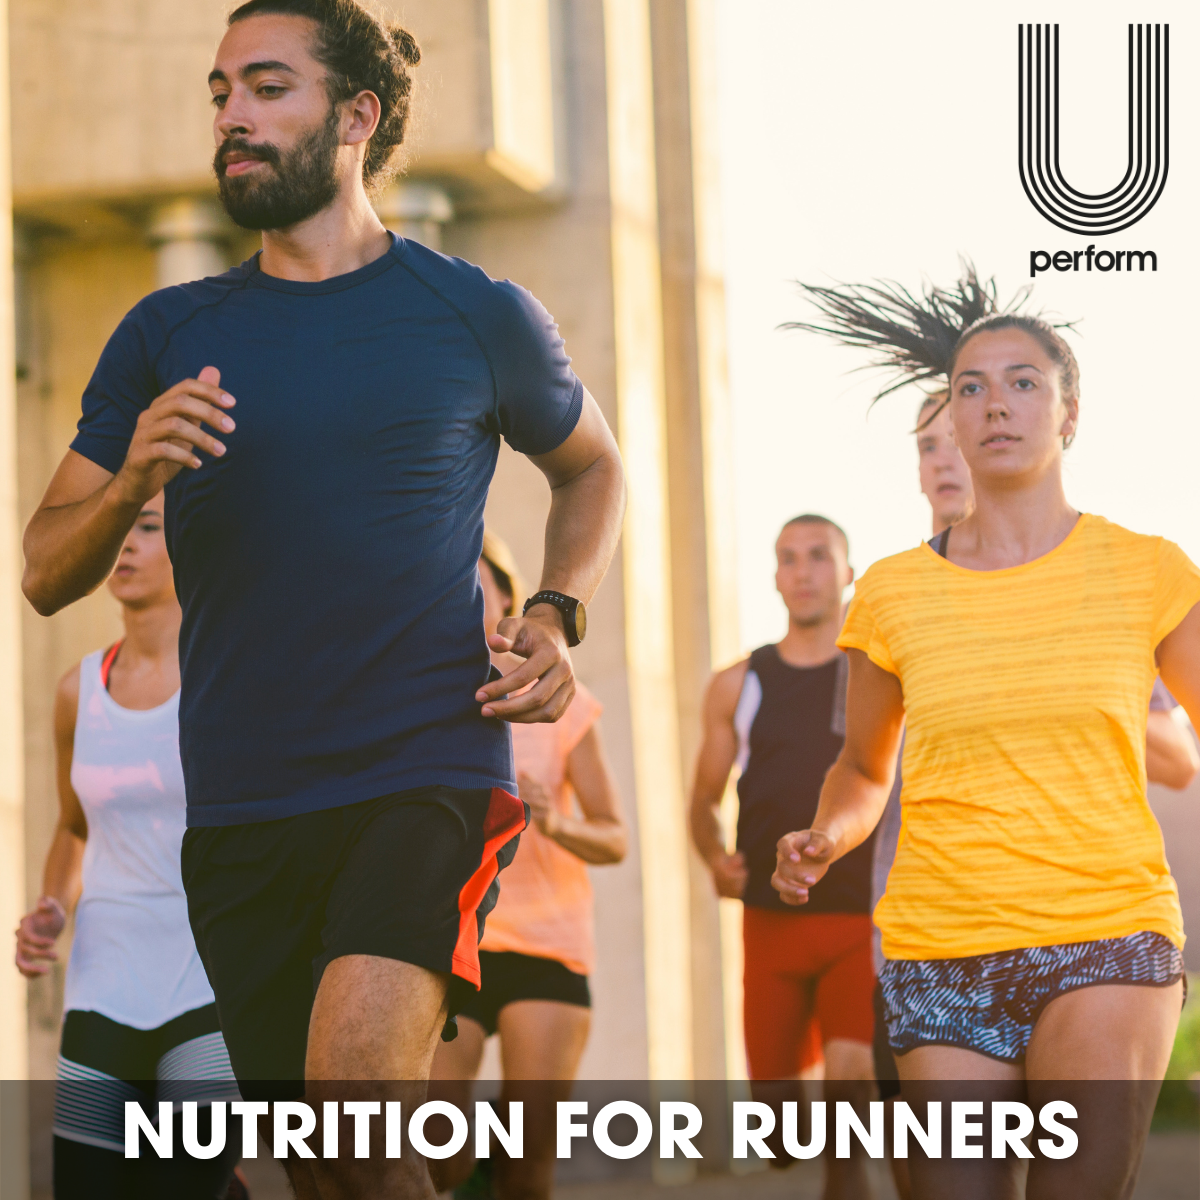 Common nutrition mistakes EVERY runner makes